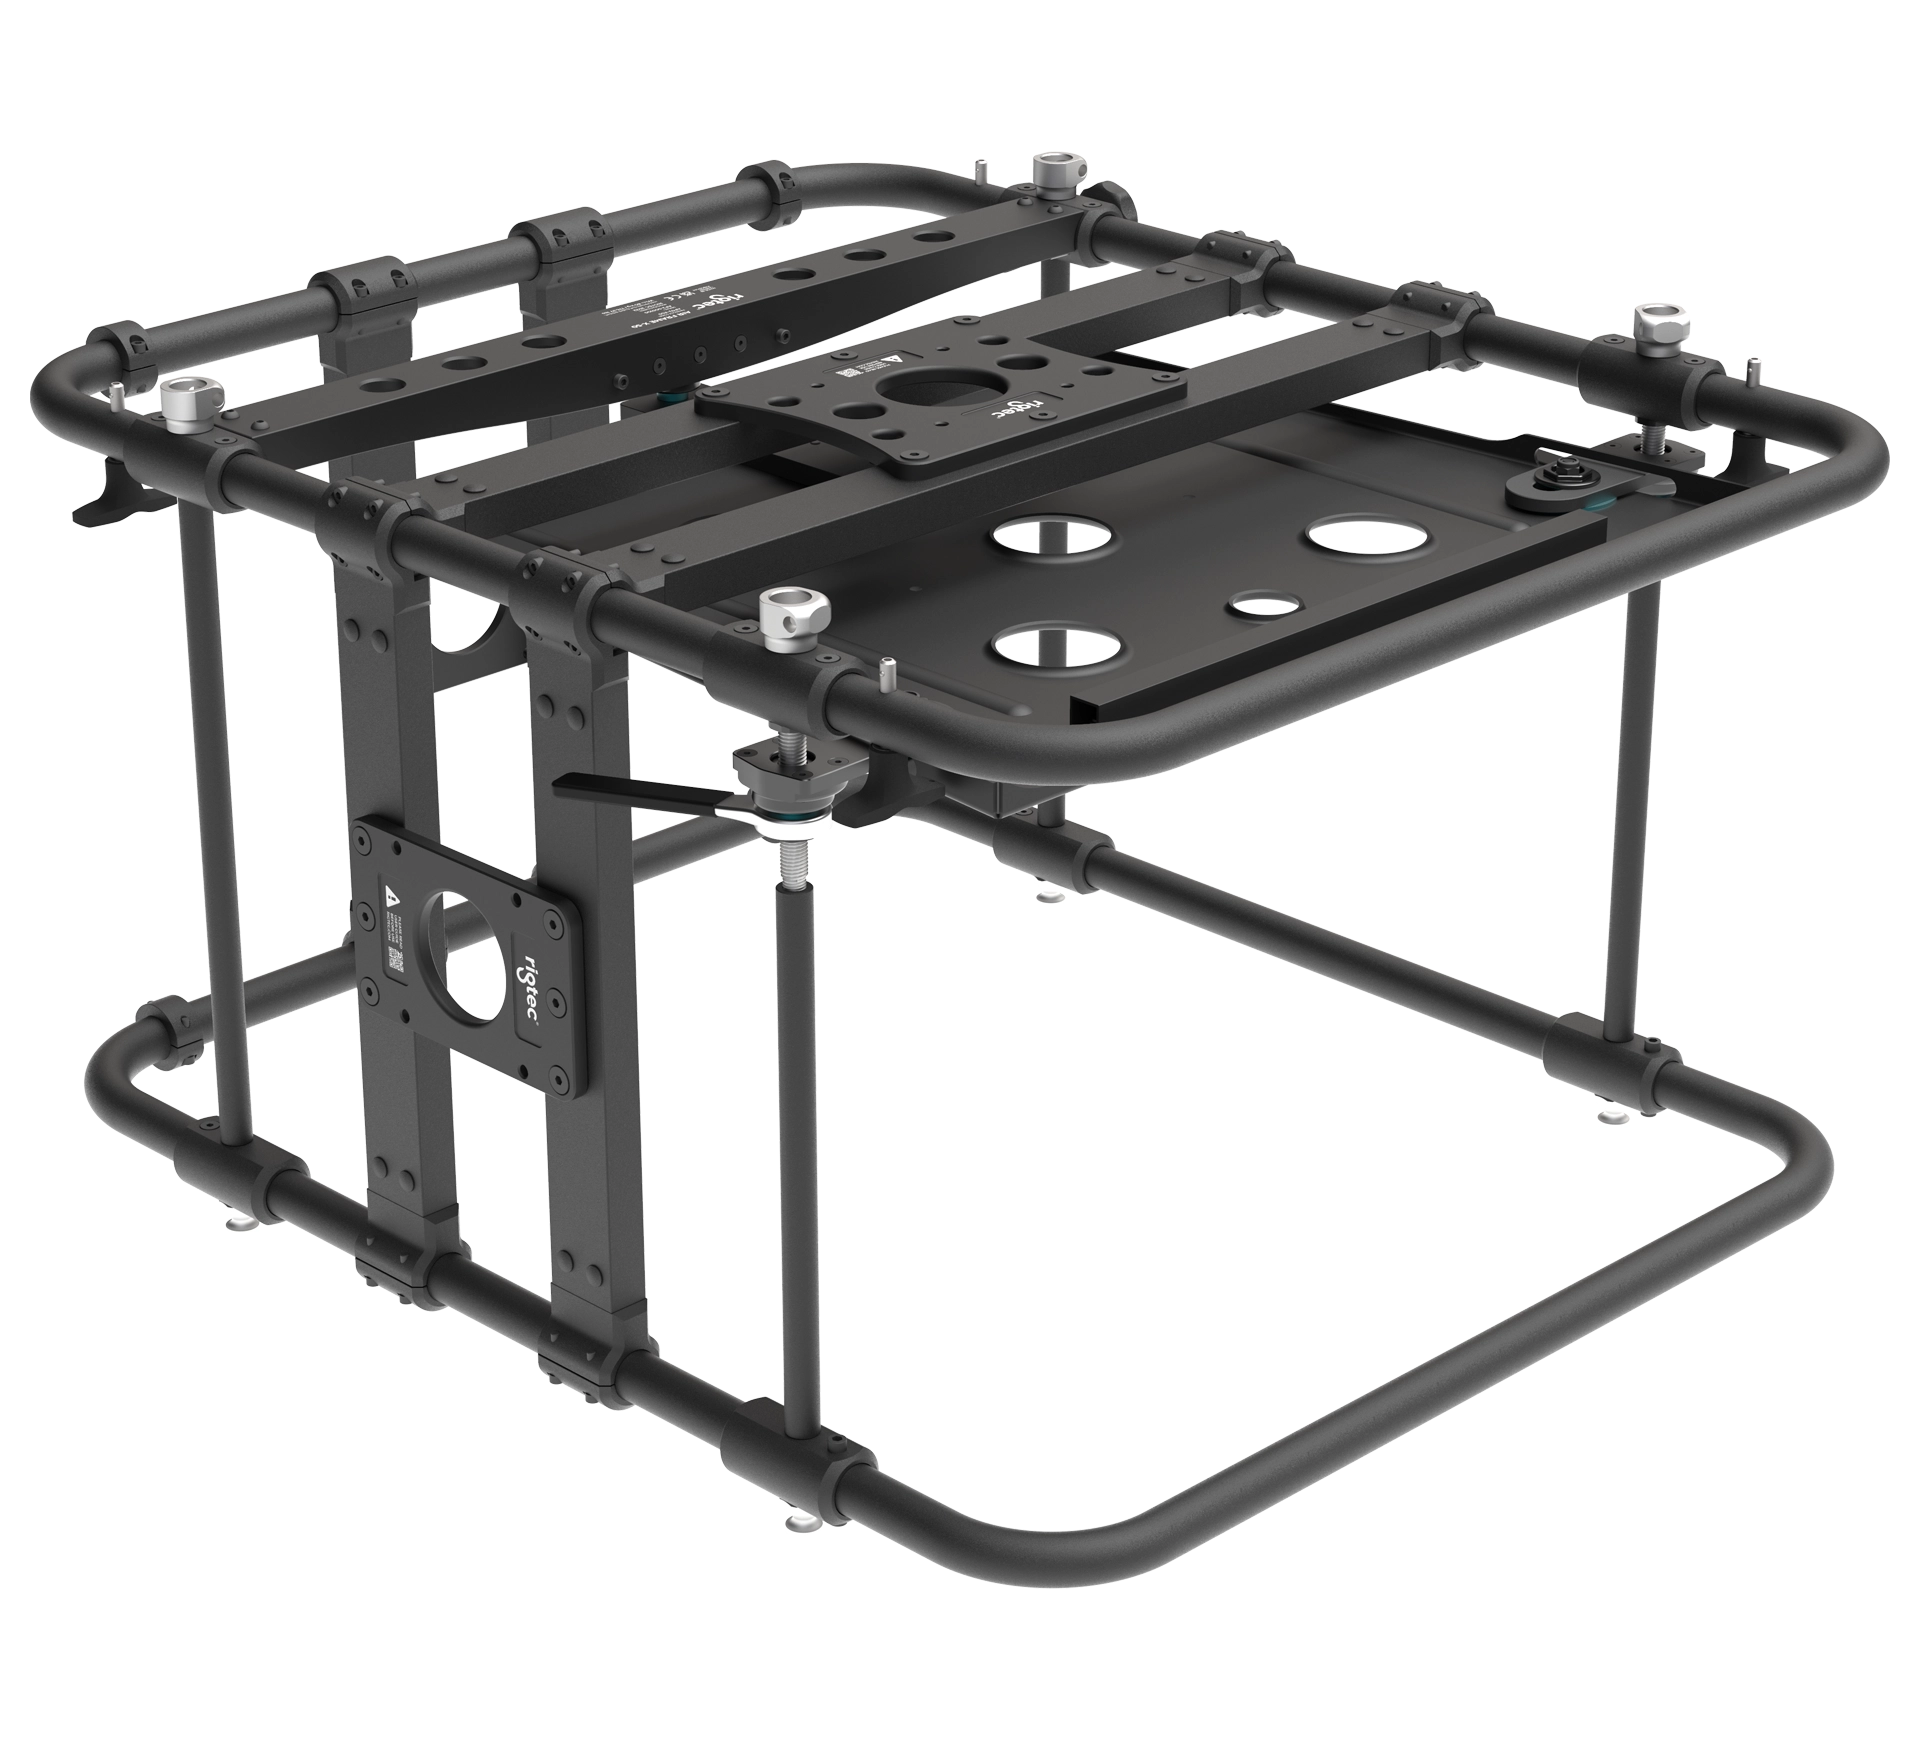 Rigtec Air Frame X50 Projector Rigging Frame